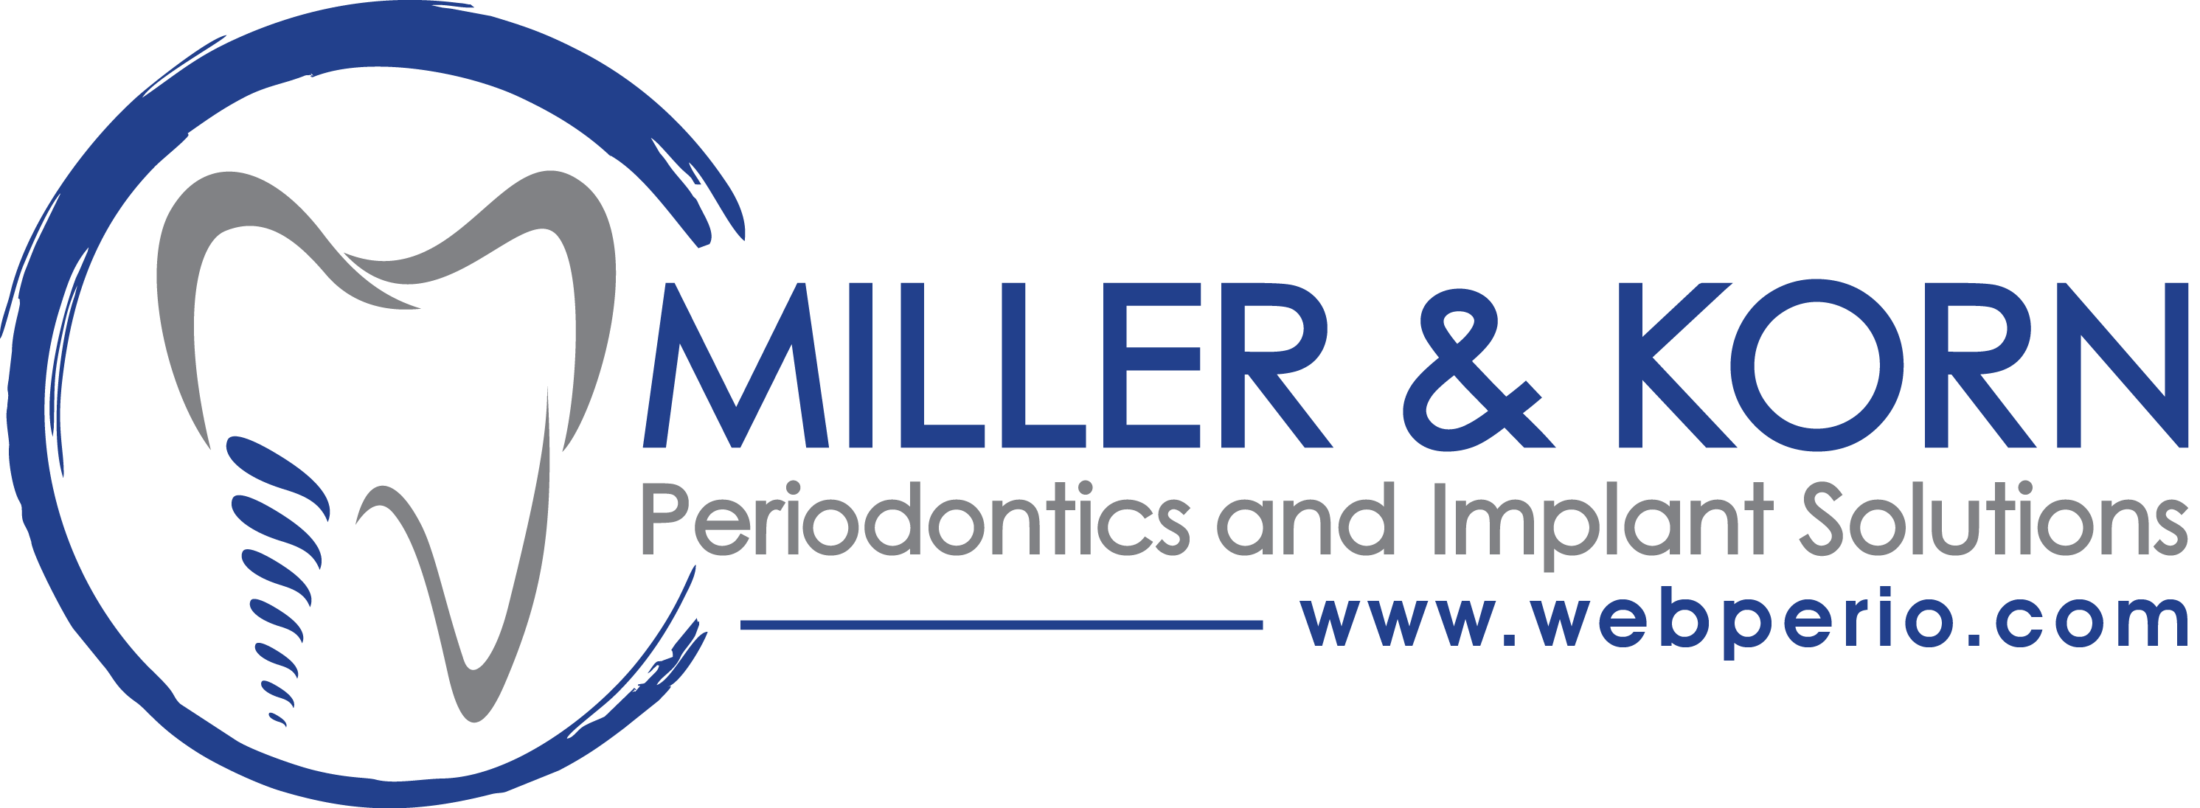 Link to South Florida Periodontics and Implant Solutions home page